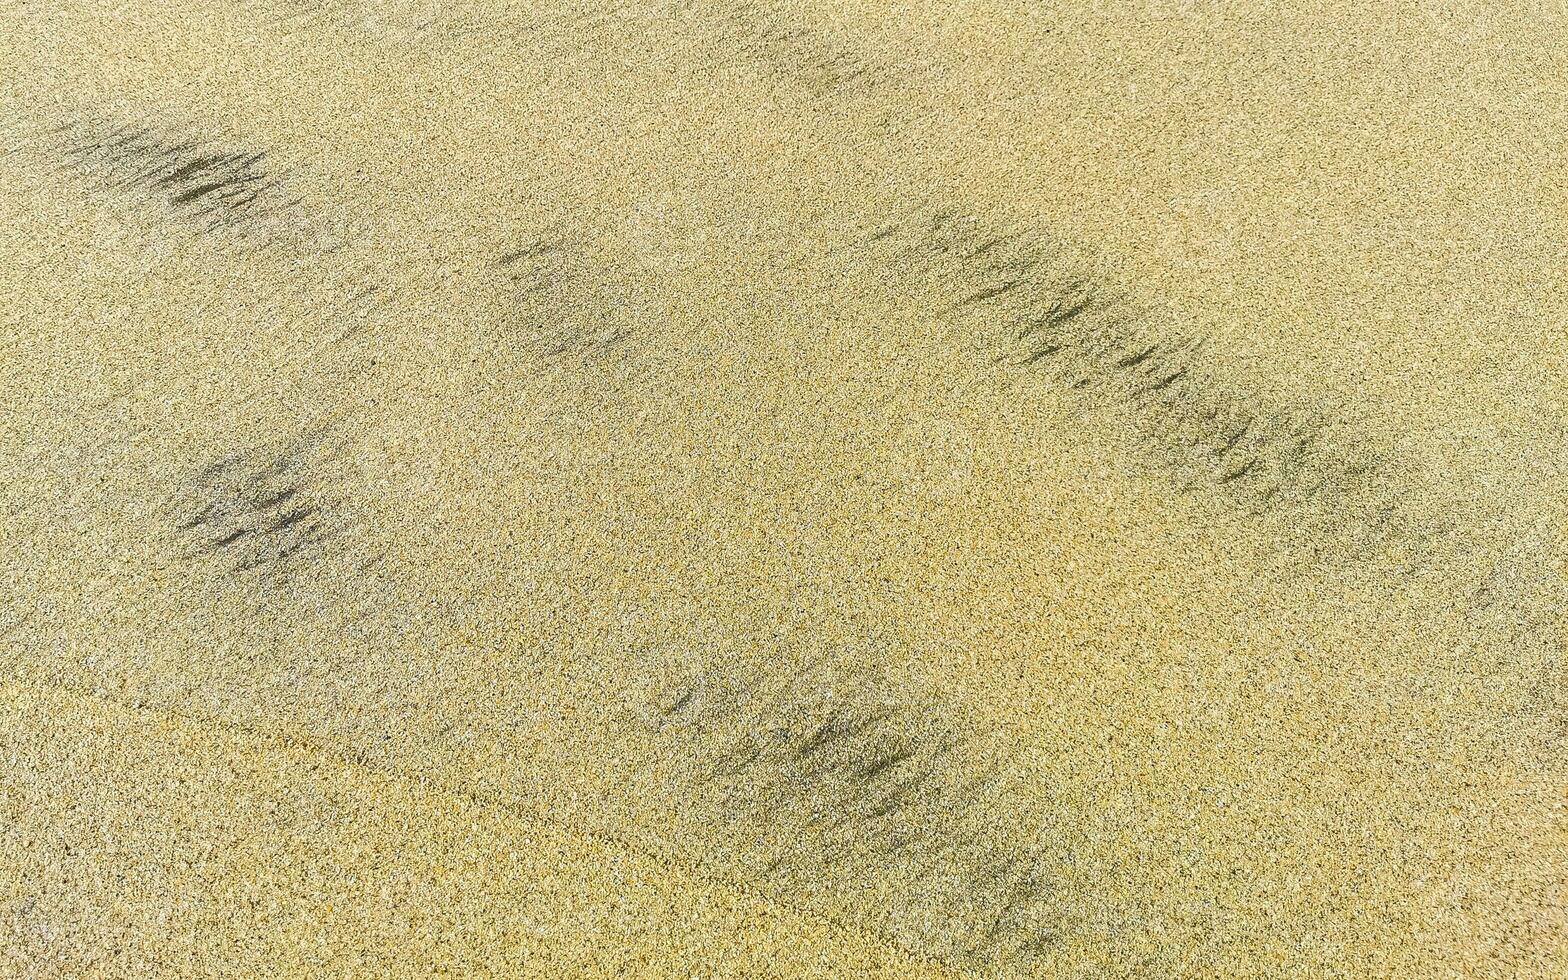 Wet beach sand water and waves texture and pattern in Mexico. photo